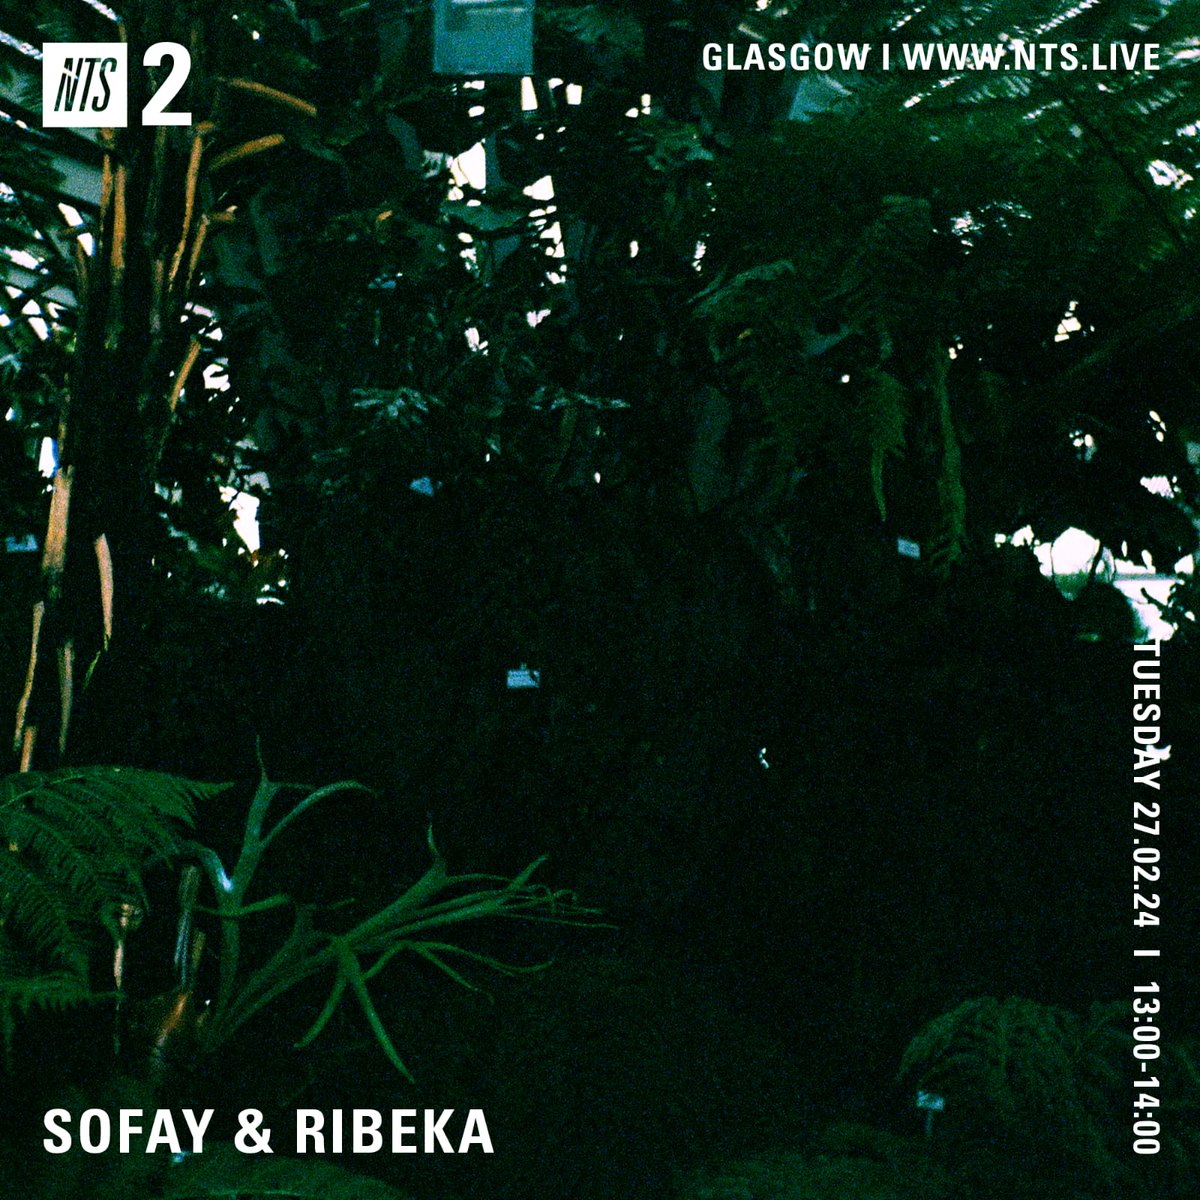 coming up today at 13:00 on @NTSlive with @r_ibeka nts.live/shows/sofay-ri…